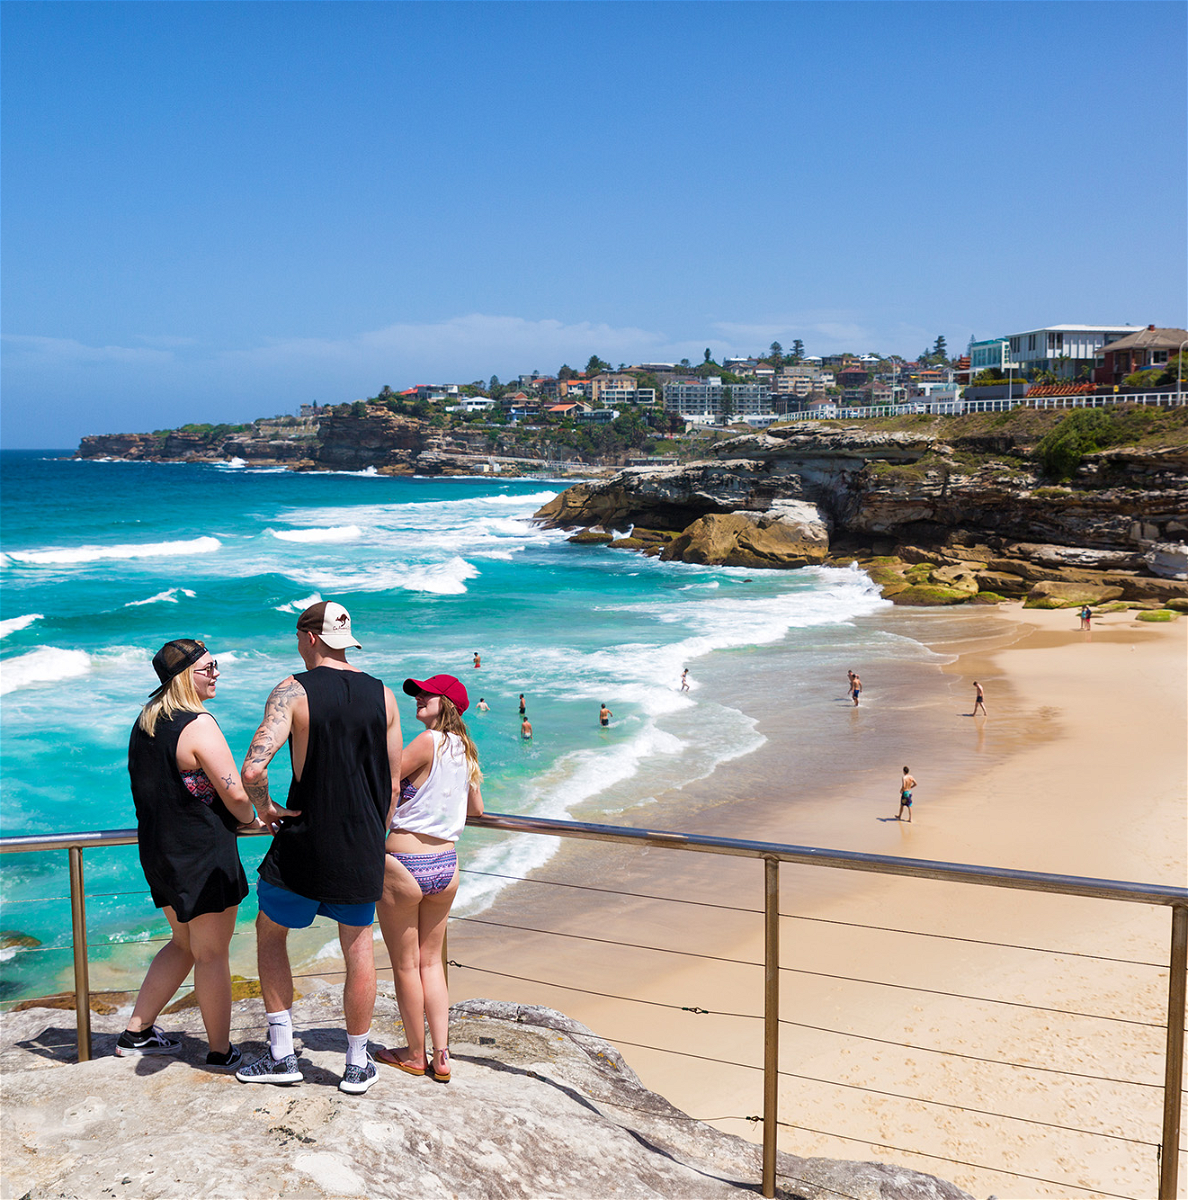 People looking over viewpoint at beach in Sydney Australia